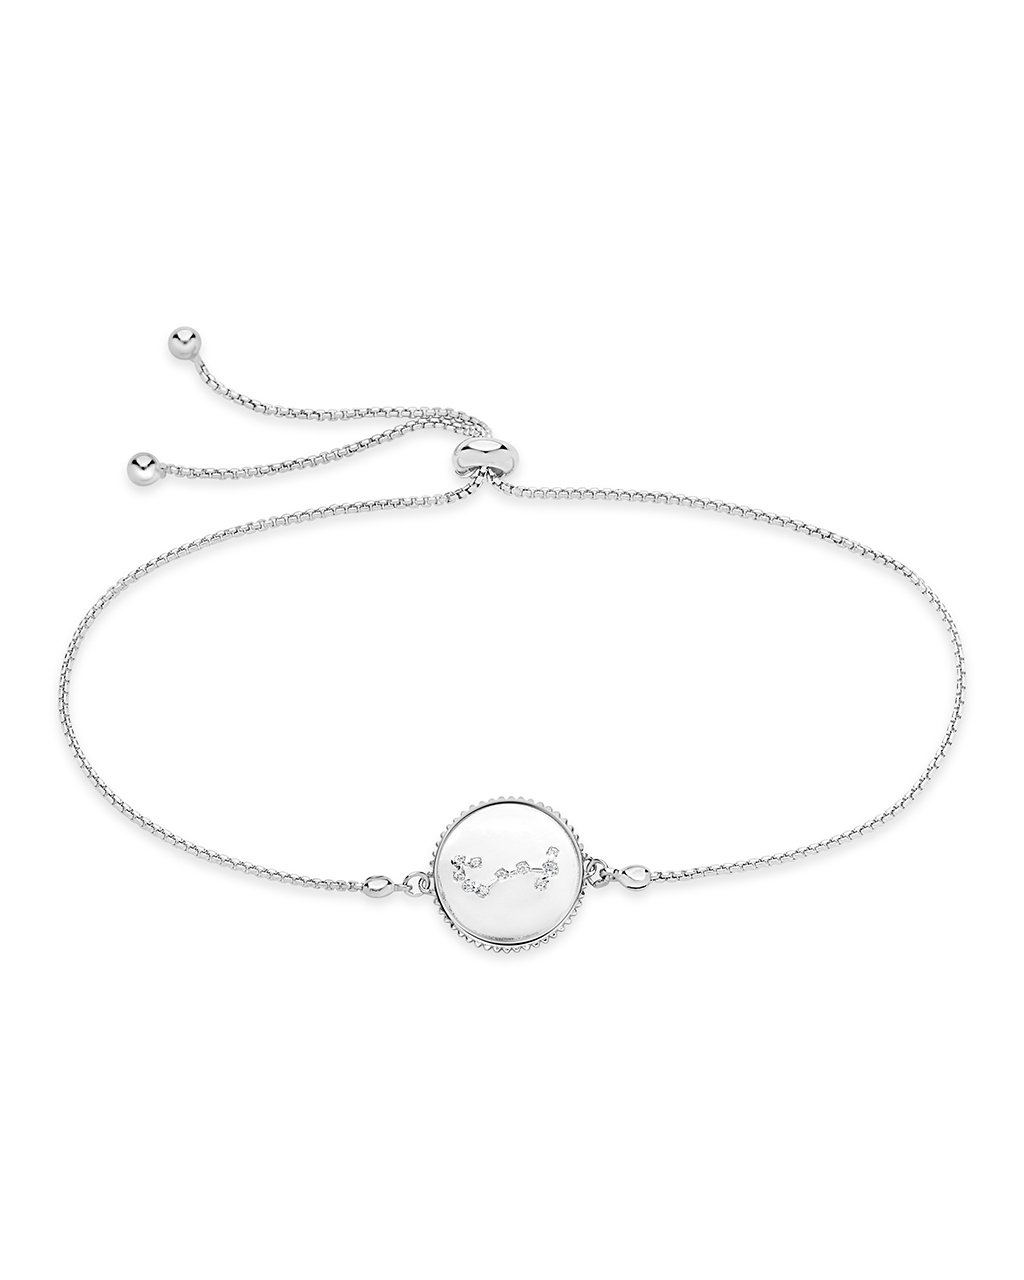 Sterling Silver Constellation Disk Bolo Bracelet Bracelet Sterling Forever Silver Scorpio (Oct 23 - Nov 21) 